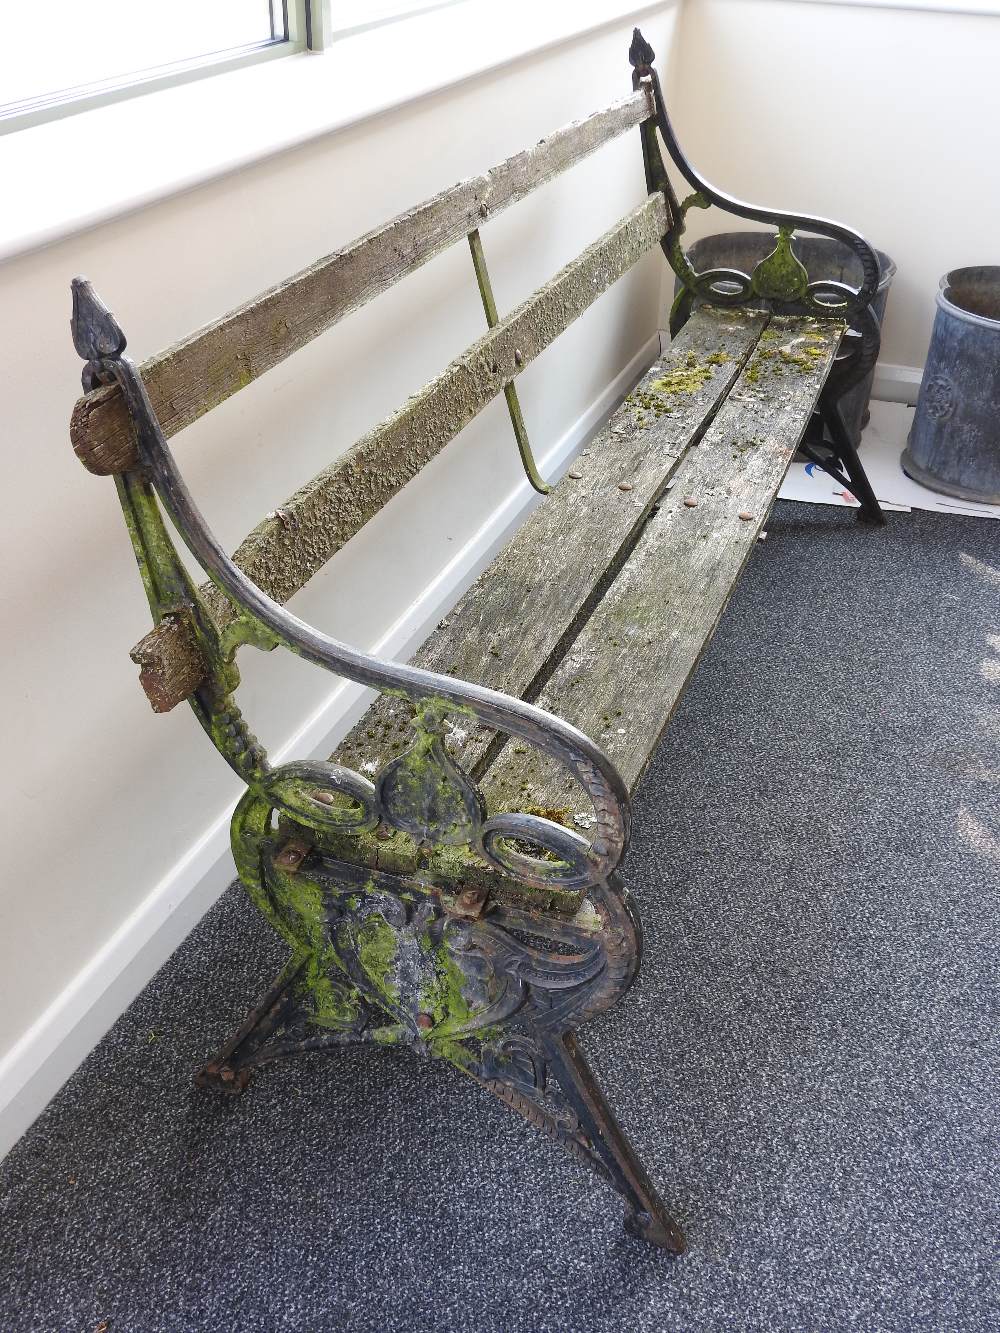 A Victorian garden bench by Coalbrookdale designed by Christopher Dresser bears ' C B Dale Co' mark